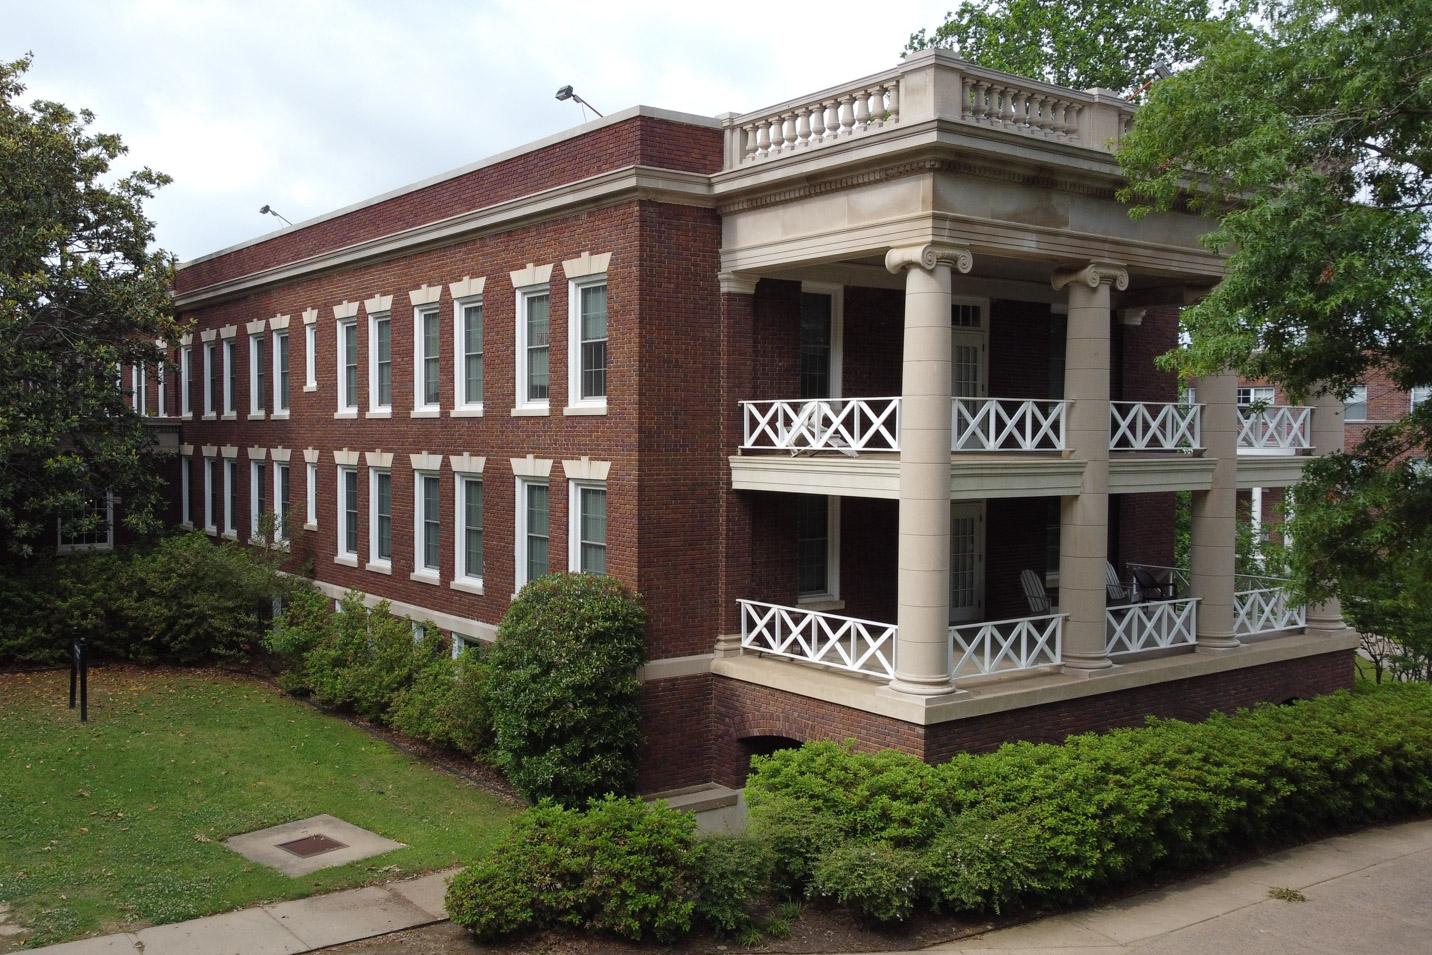 This is a photo of Pattie Cobb Hall, a women's residence hall at Harding University.